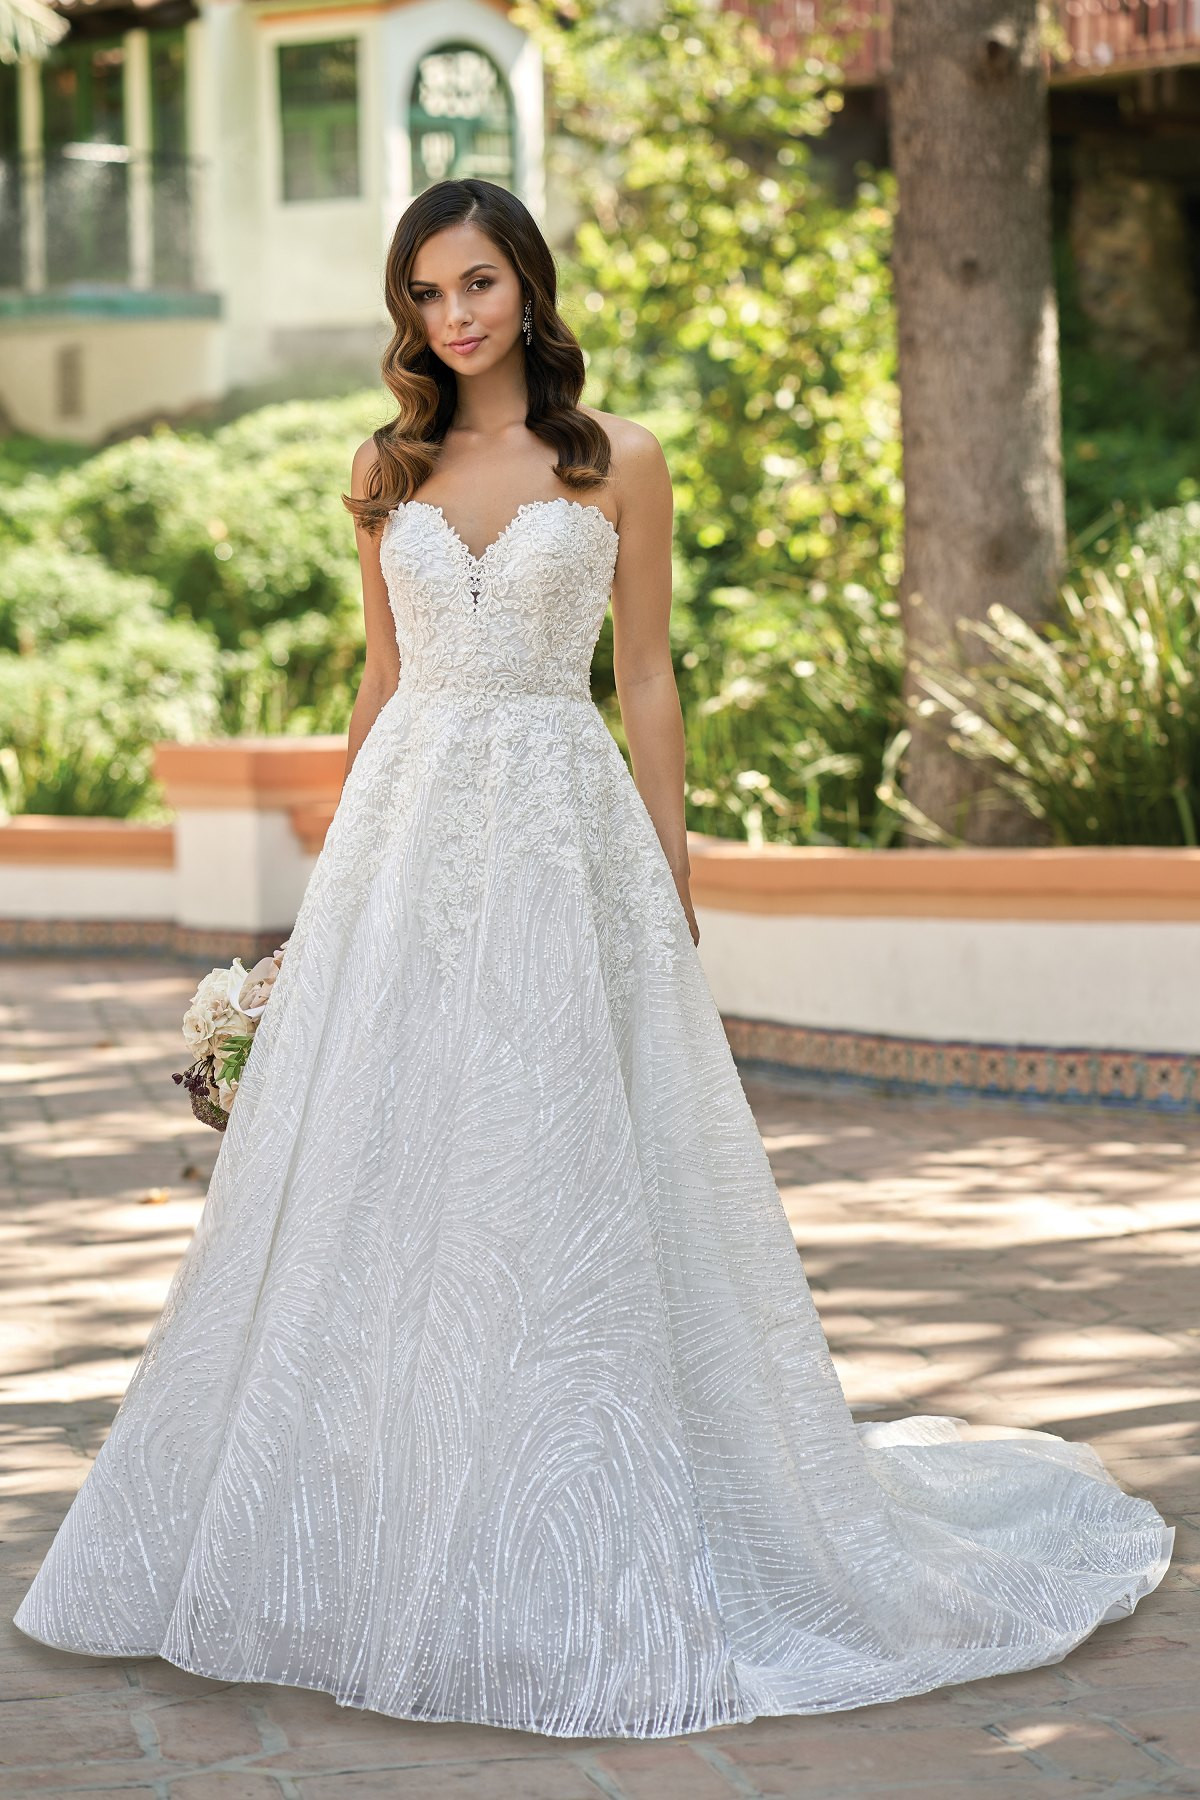 Sweetheart Wedding Gown
 T Beautiful Embroidered Lace Strapless Wedding Dress